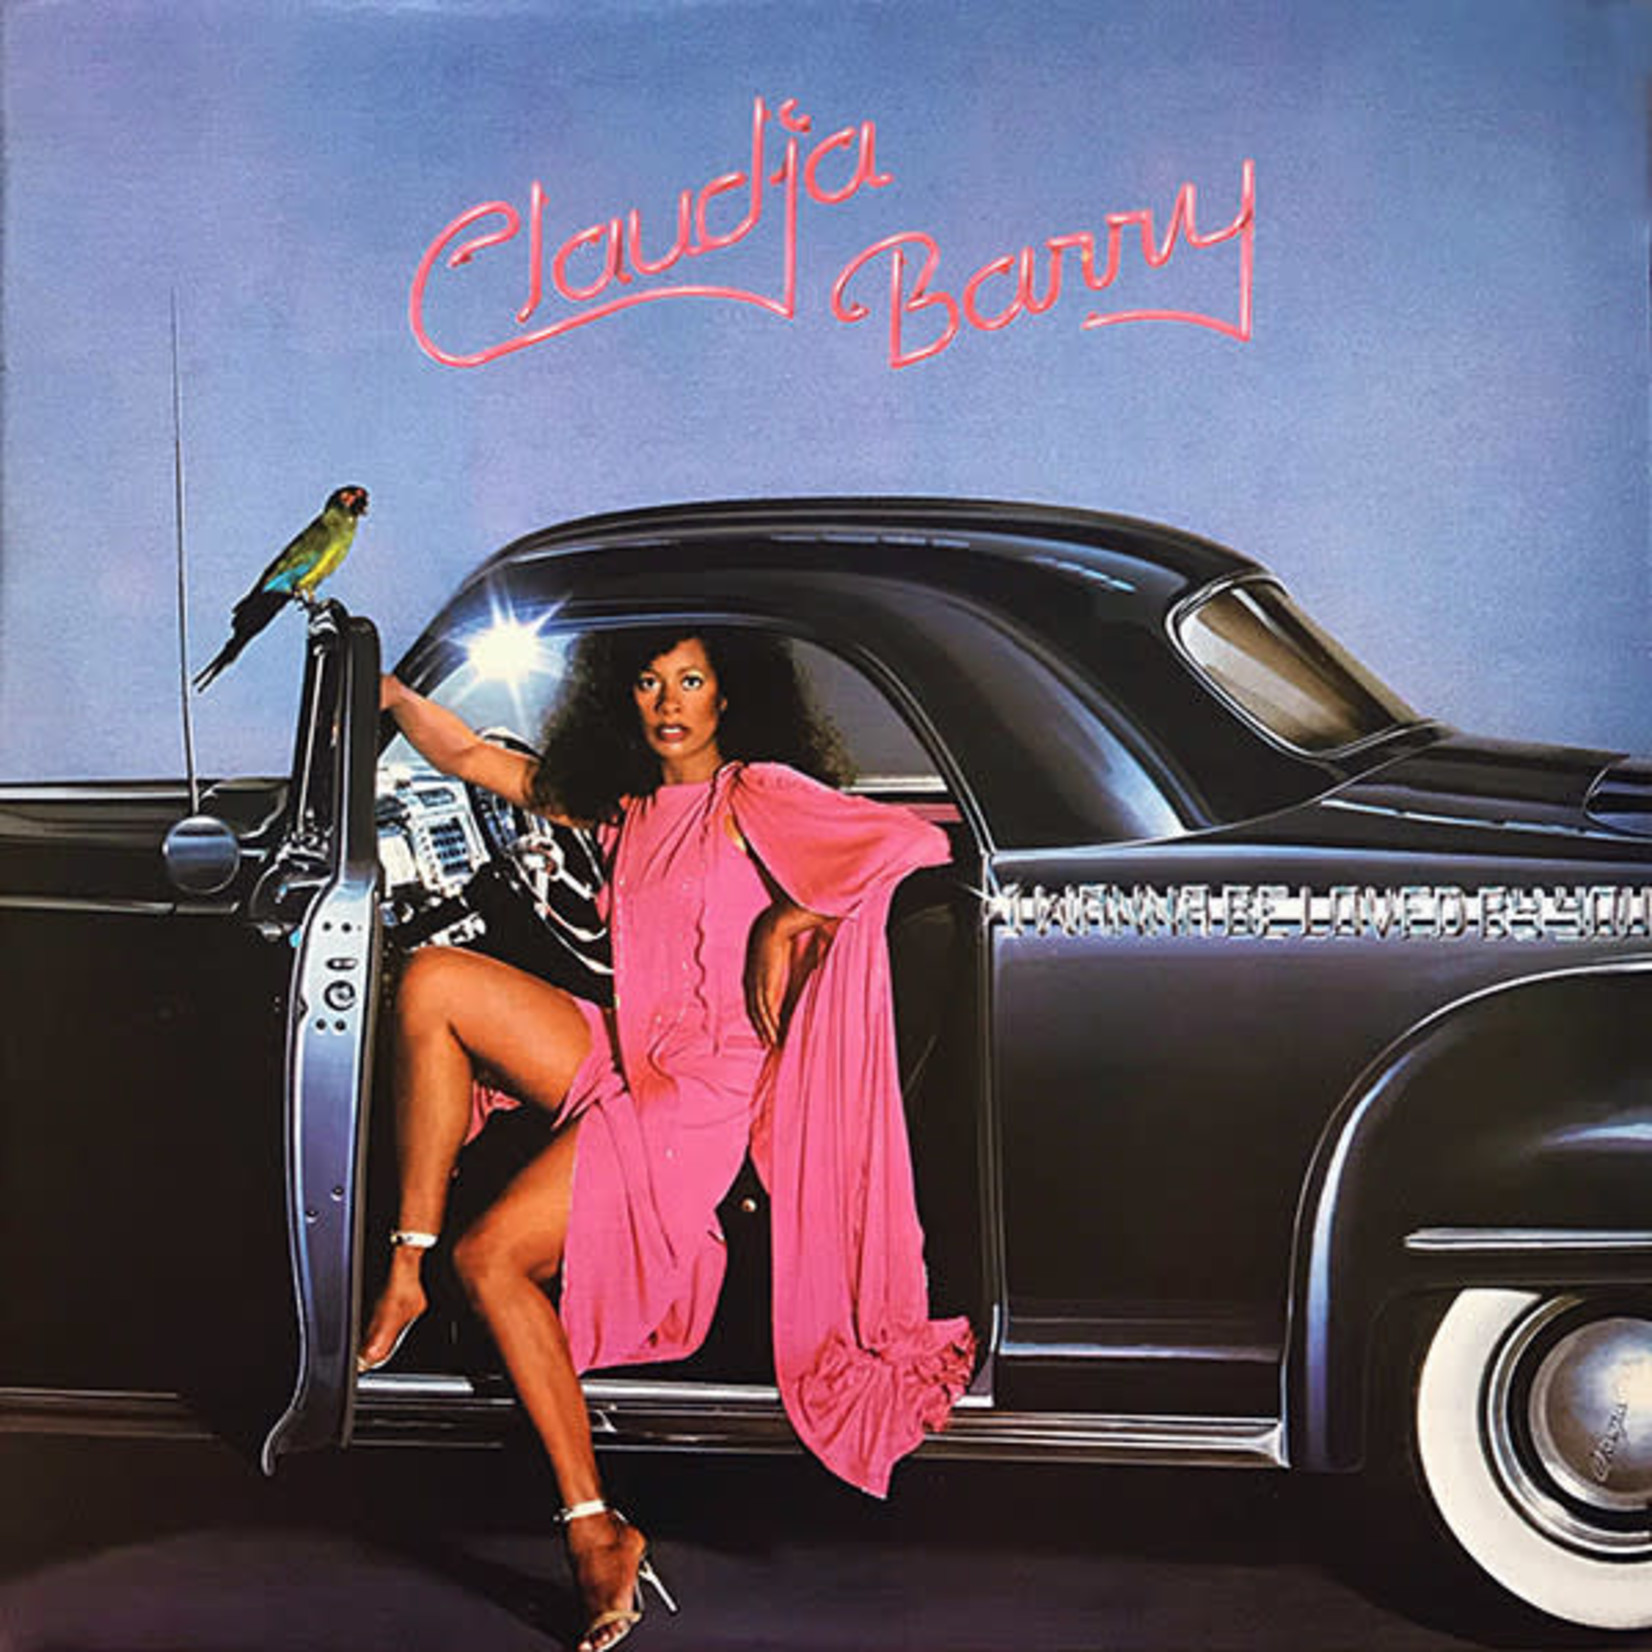 Claudja Barry Claudja Barry – I Wanna Be Loved By You (VG, 1978, LP. RED Vinyl, Lollipop Records – LGR 1003, Canada))